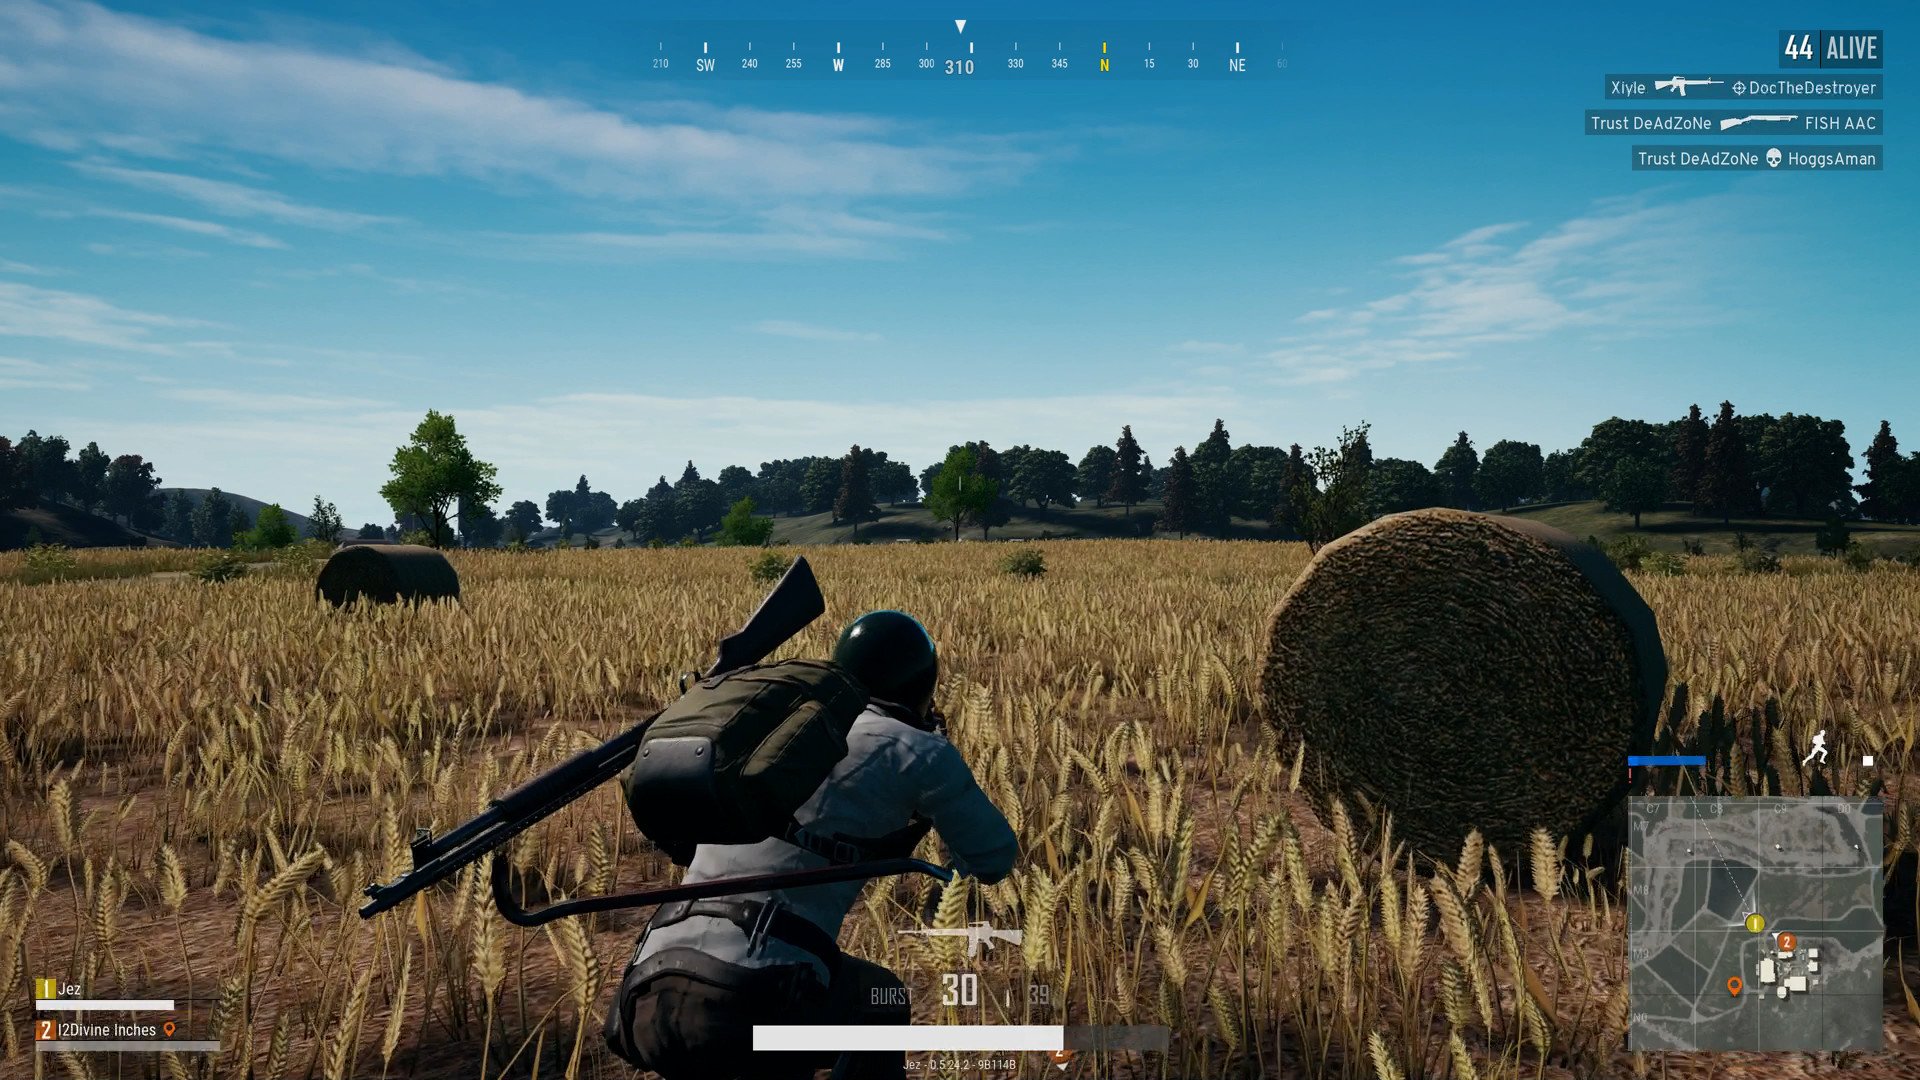 PlayerUnknown's Battlegrounds for Xbox One is unique and ...